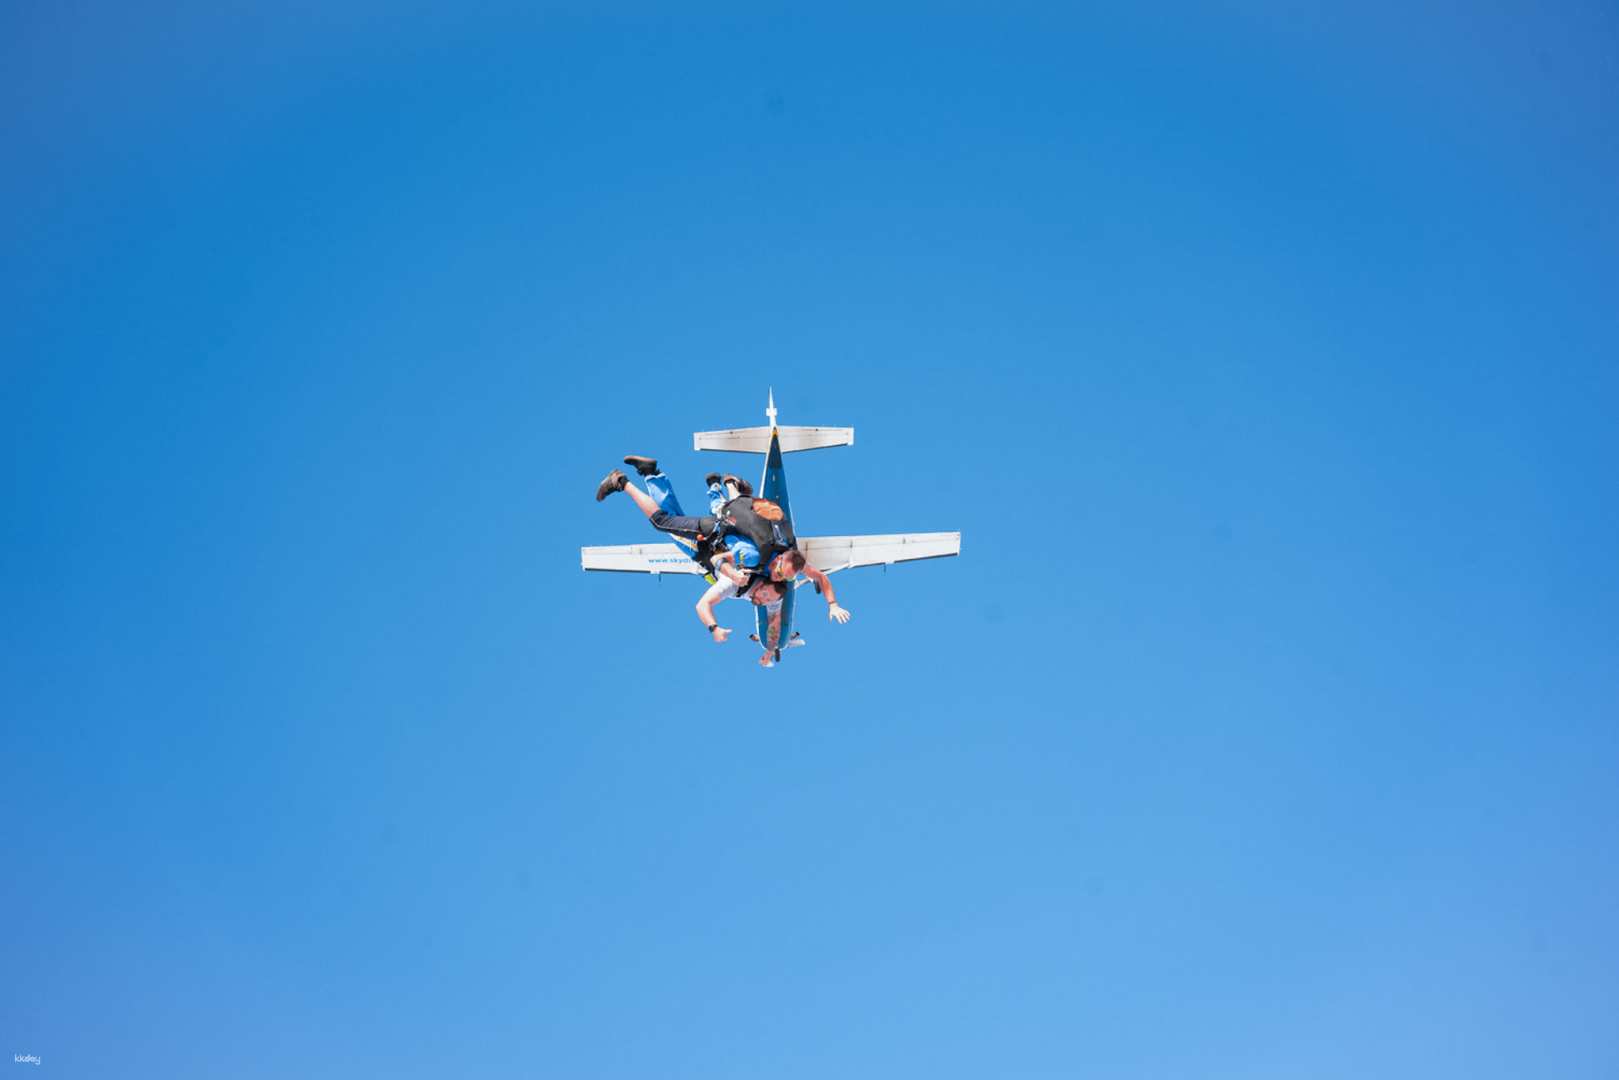 [With Transfer] Perth Rockingham Skydiving Experience | Western Australia